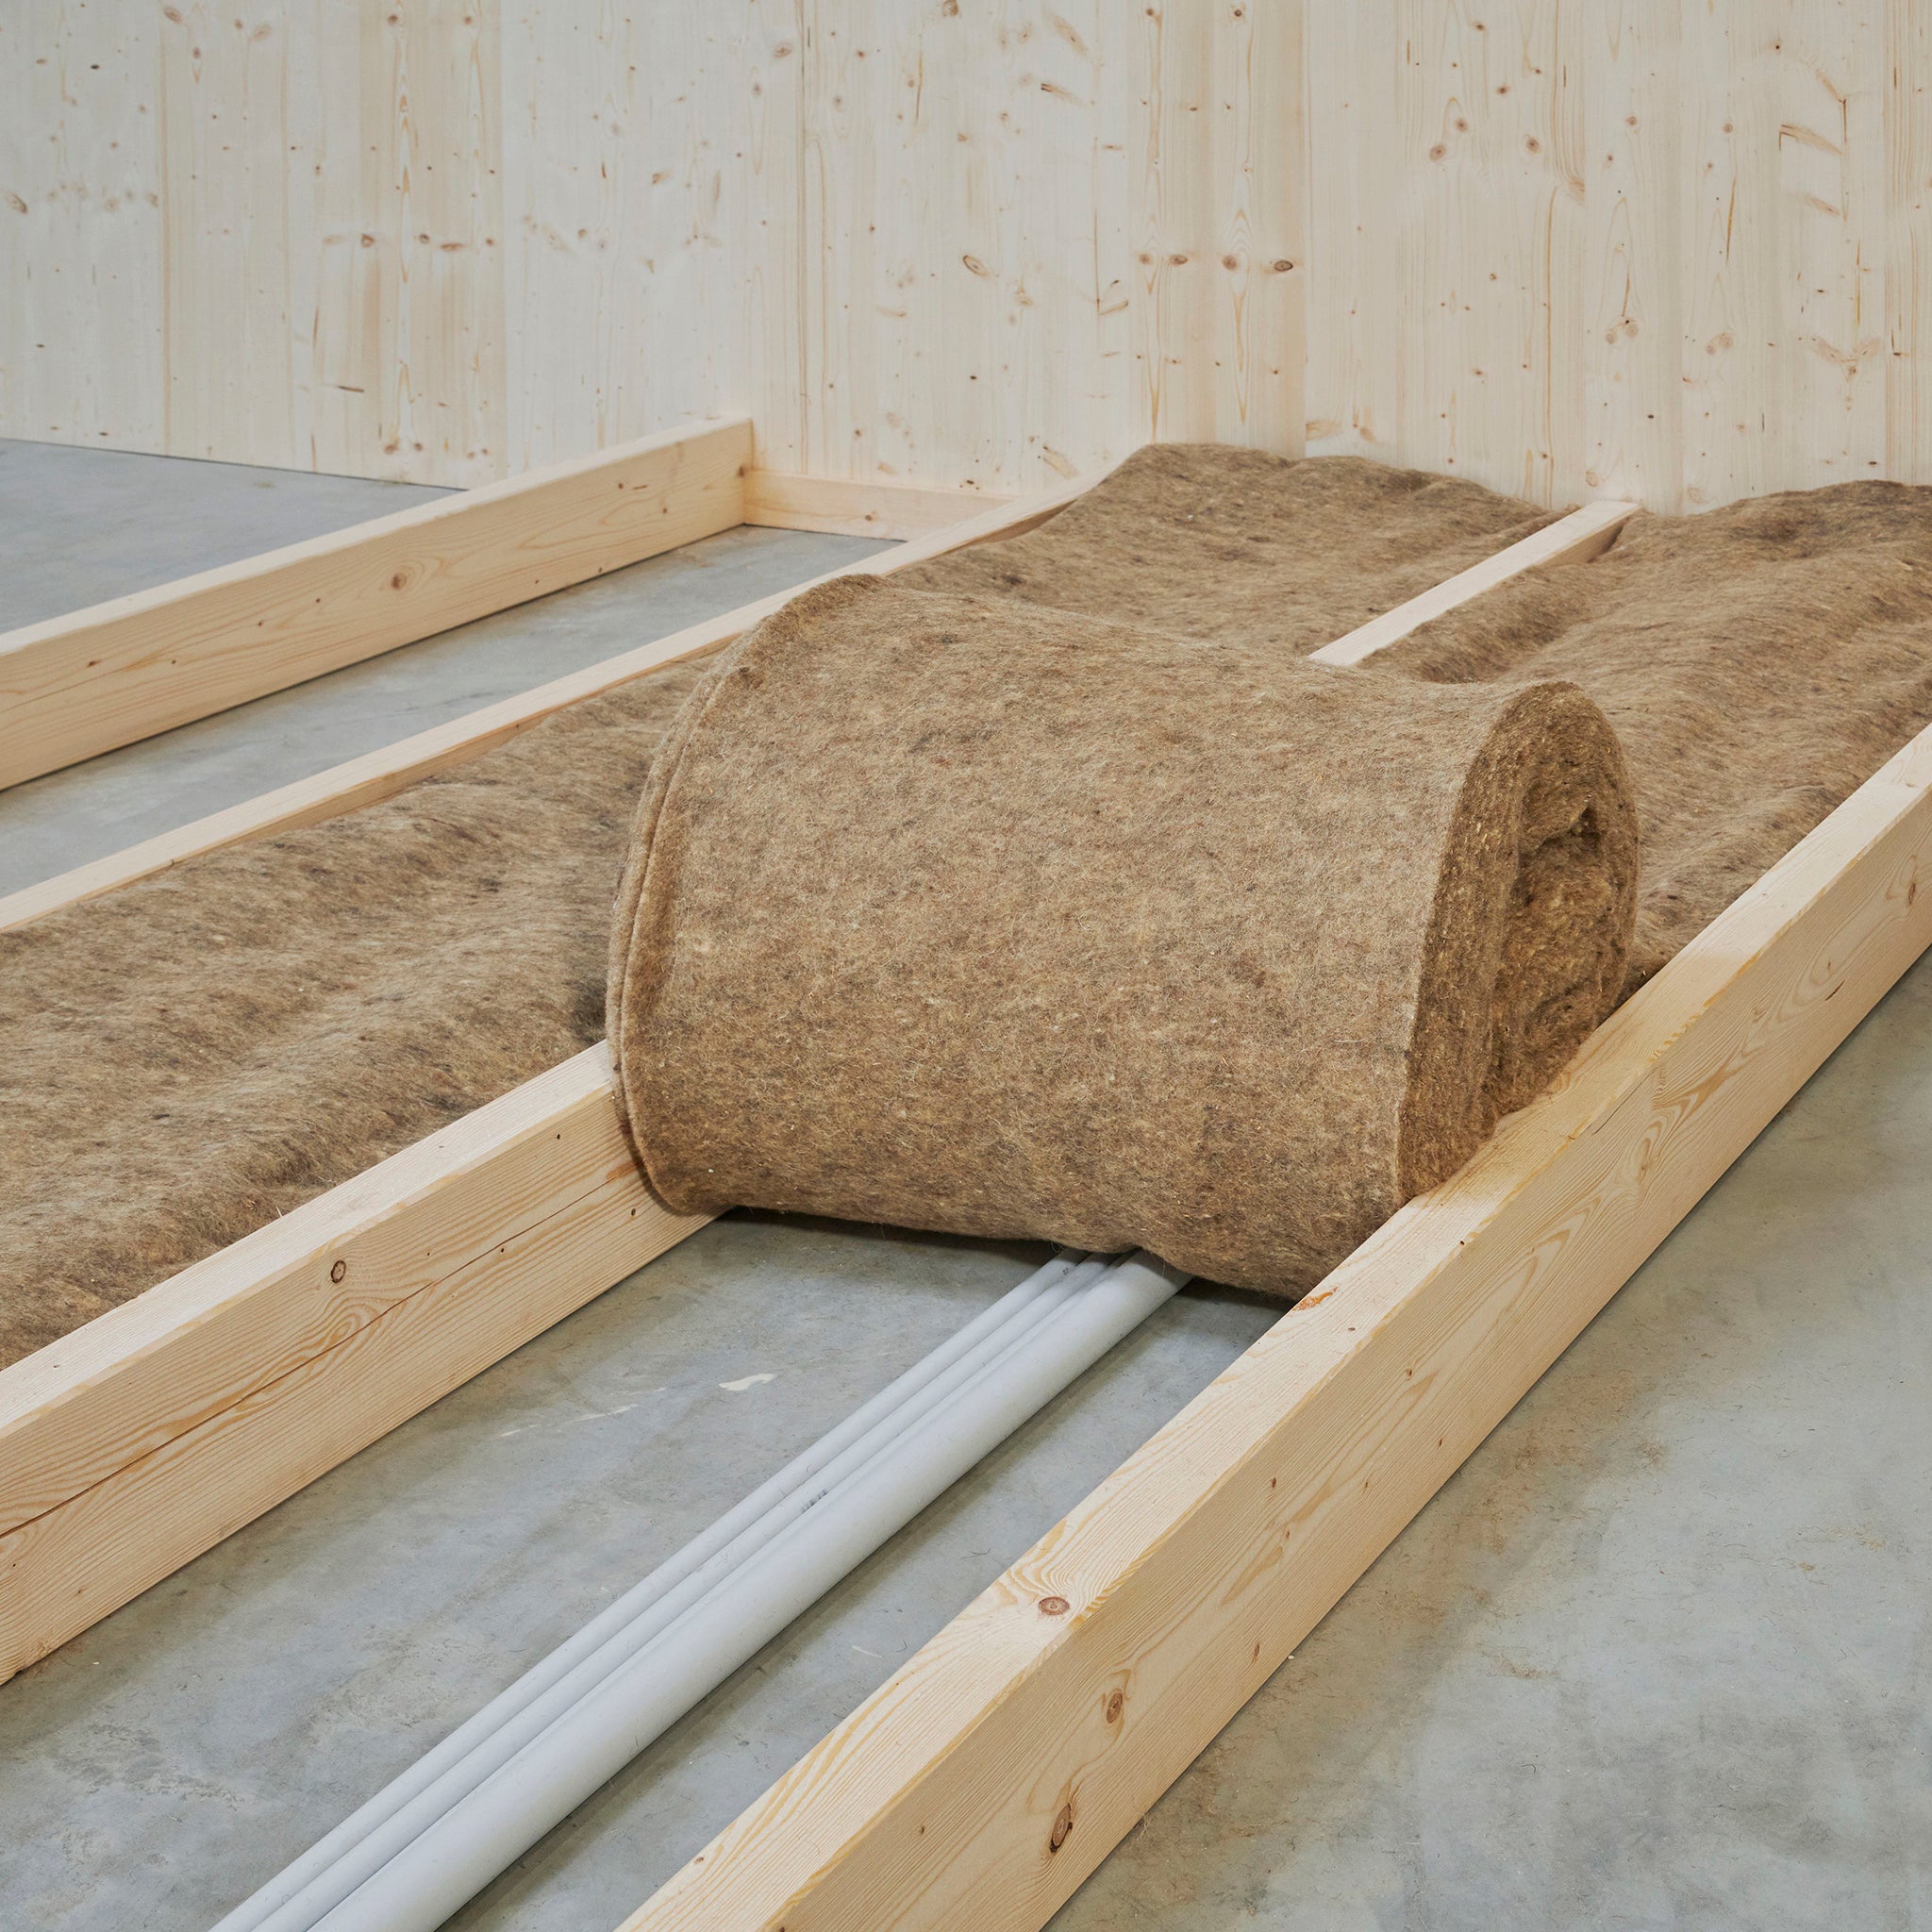 R20 x 15 in Cosy Wool Sheeps Wool Insulation Roll & Pack - Eco-Building  Resource - Canada's Green Building Supply Source